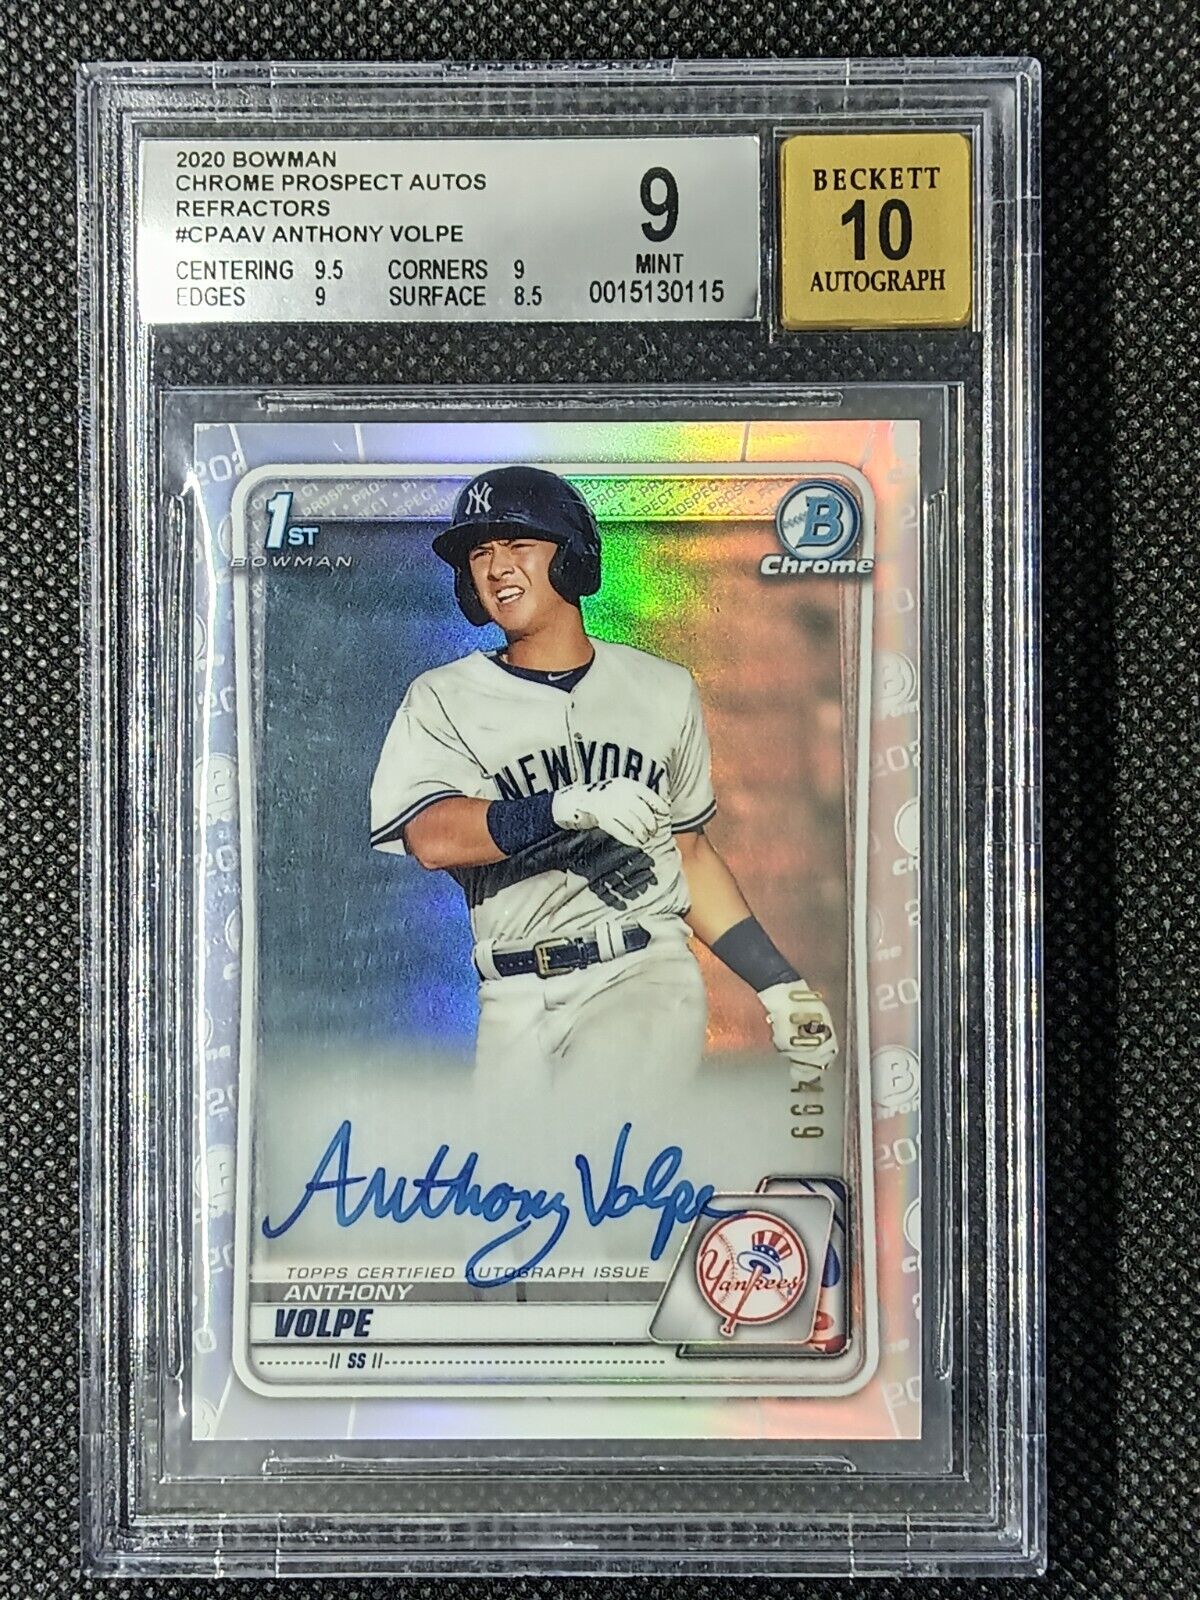 Anthony Volpe 2020 Bowman 1st Chrome Prospect Auto Refractor #/499 BGS 9 Auto 10